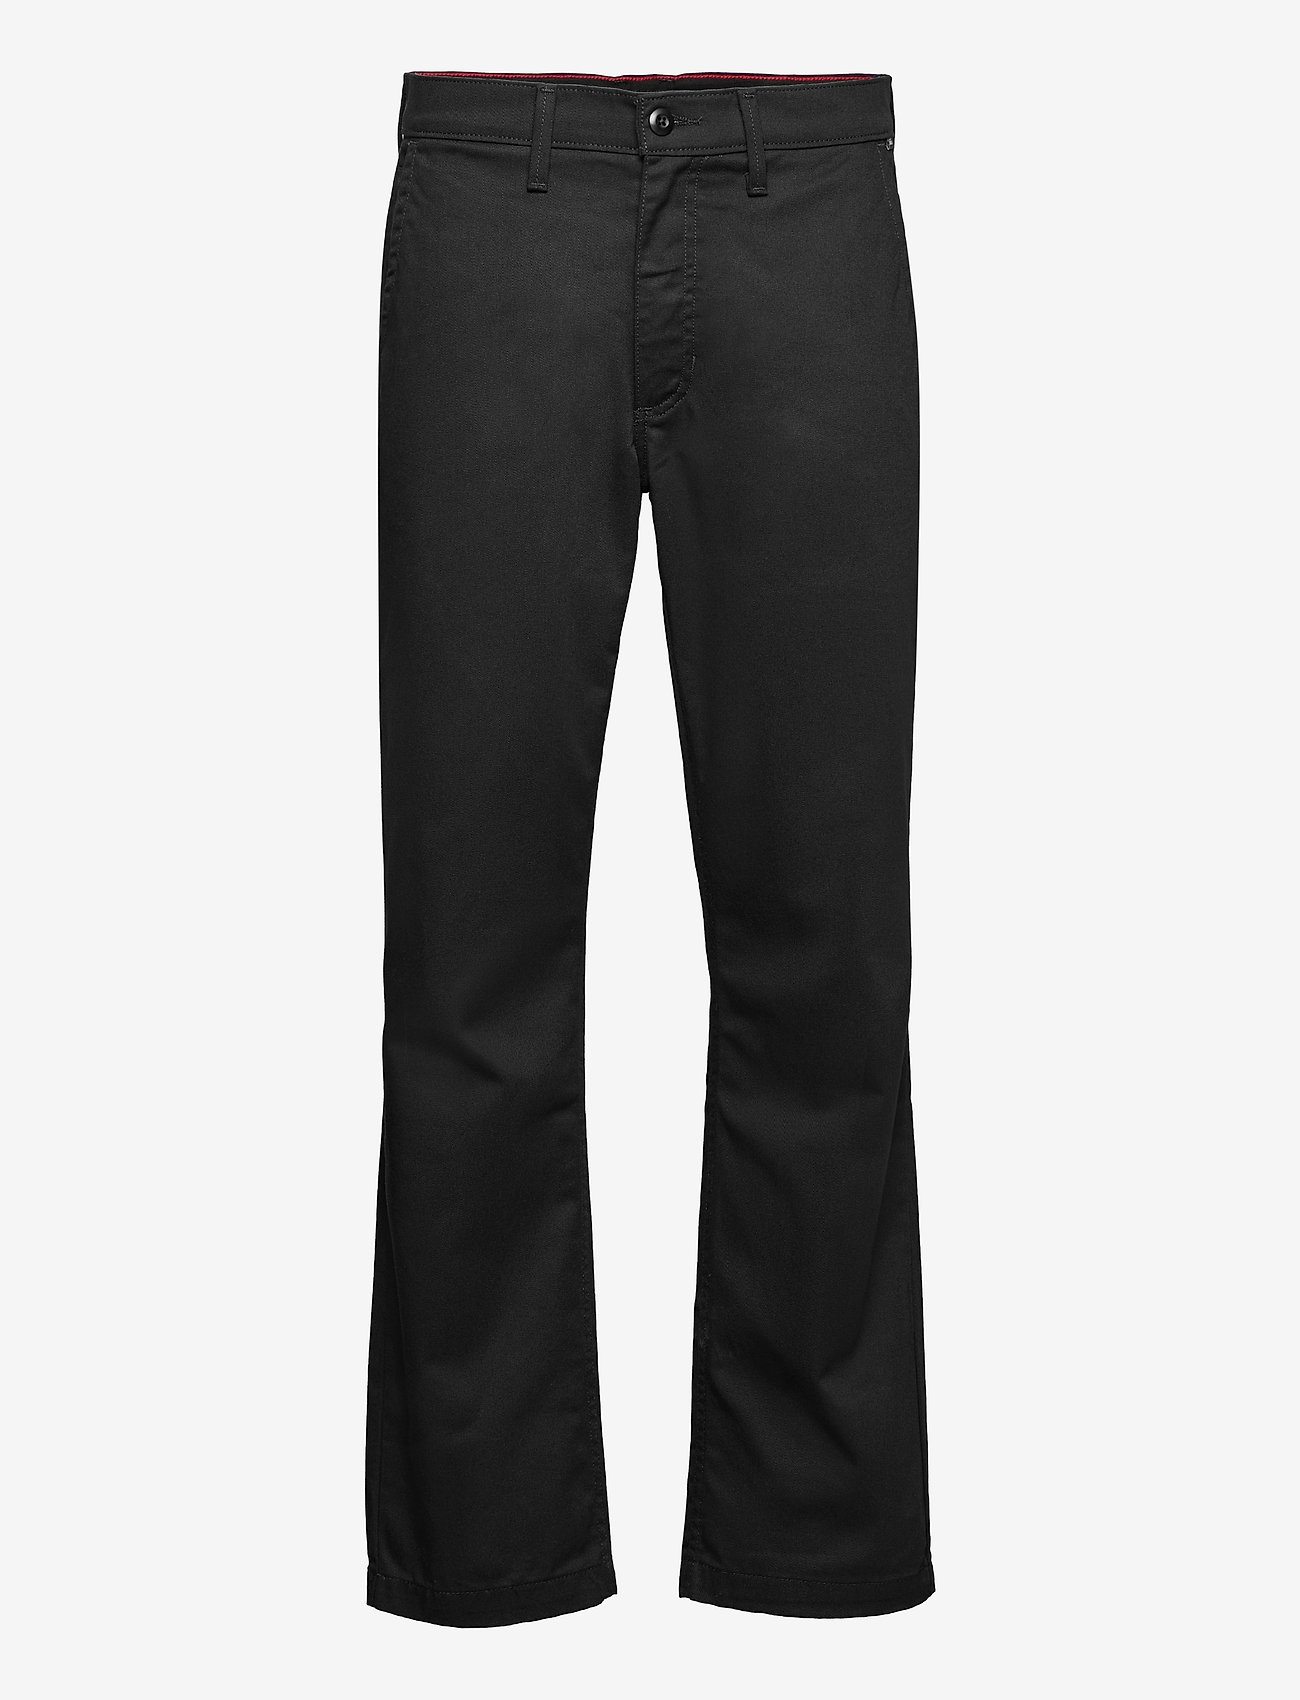 VANS - MN AUTHENTIC CHINO RELAXED PANT - sporthosen - black - 0